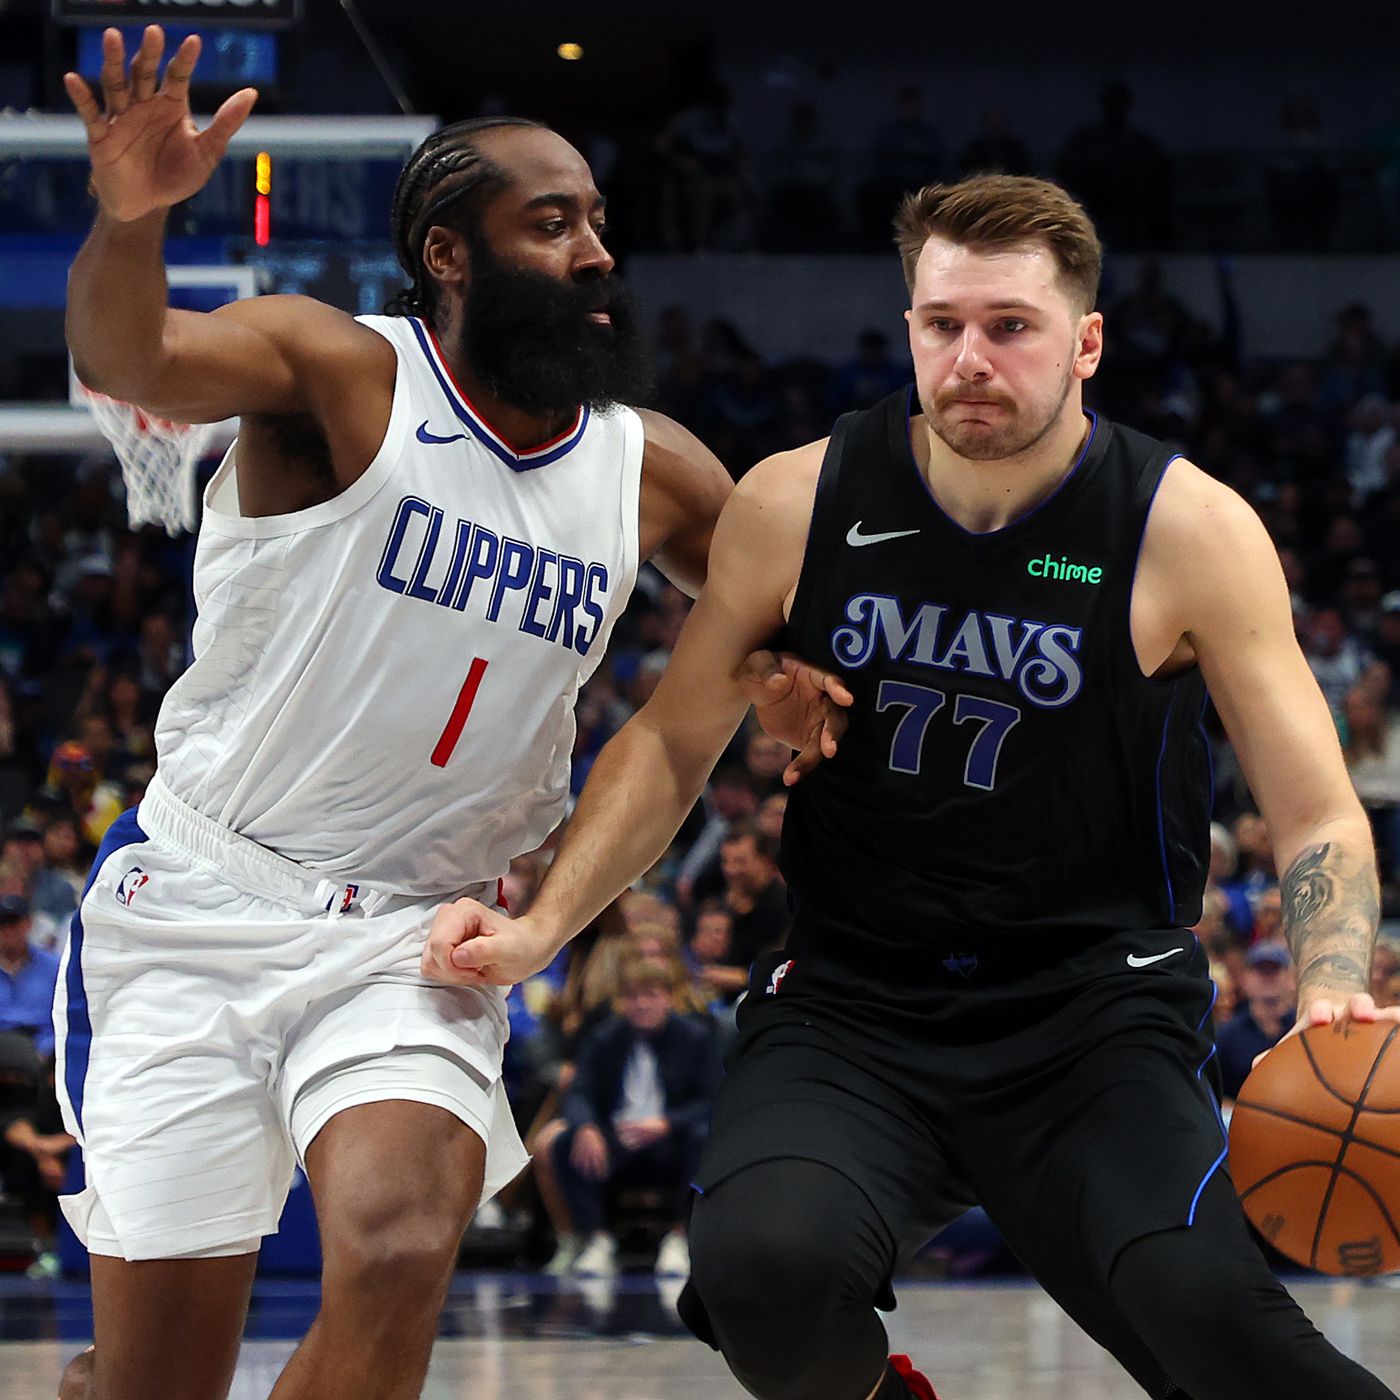 Clippers-Mavs: 5 takeaways as Mavs grab upper hand - Implications of the Mavs taking the upper hand